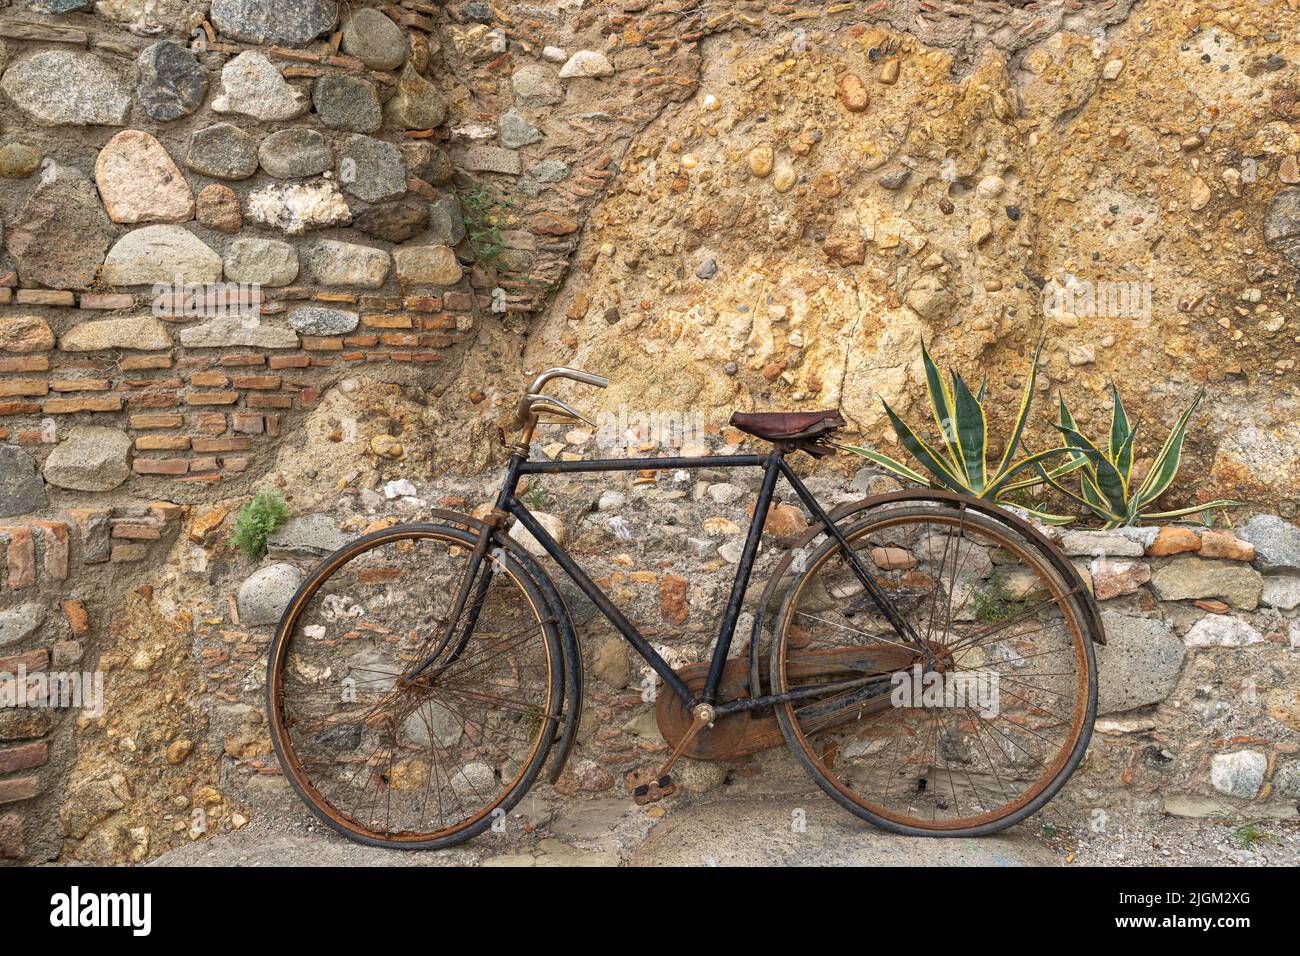 An old rusted bicycle as a decoration on a stone wall Stock Photo